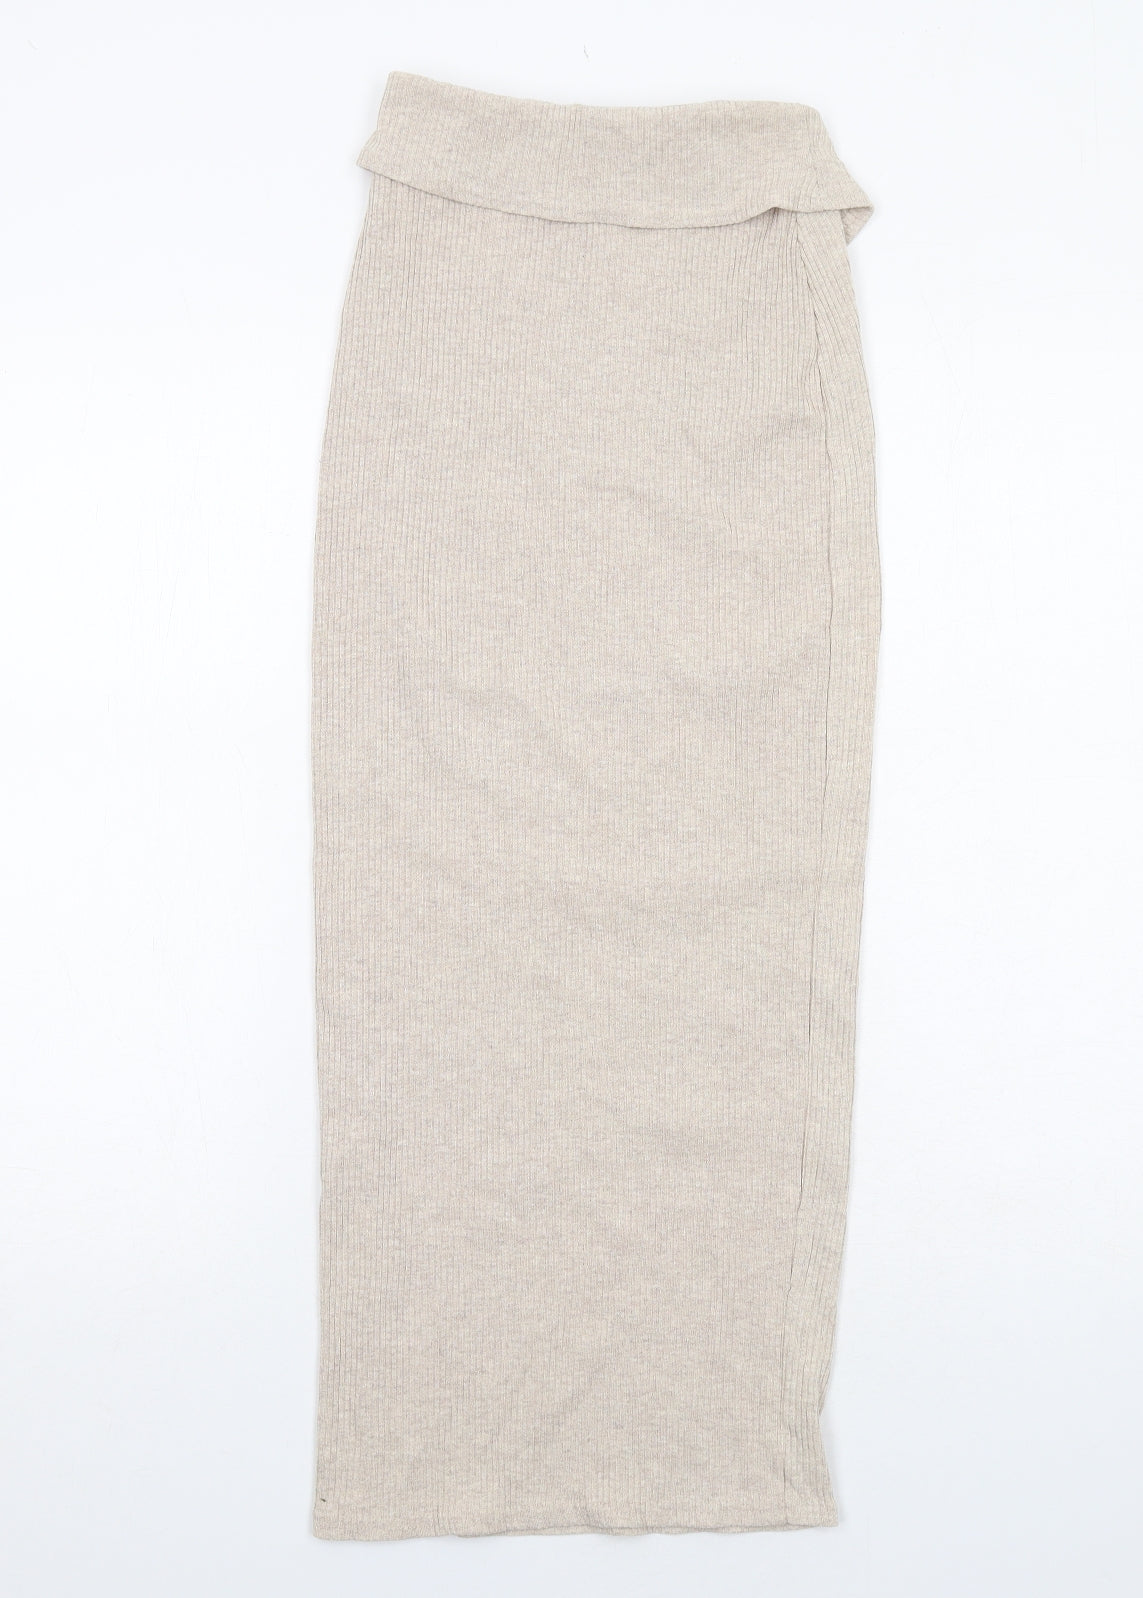 PRETTYLITTLETHING Womens Beige Cotton A-Line Skirt Size 6